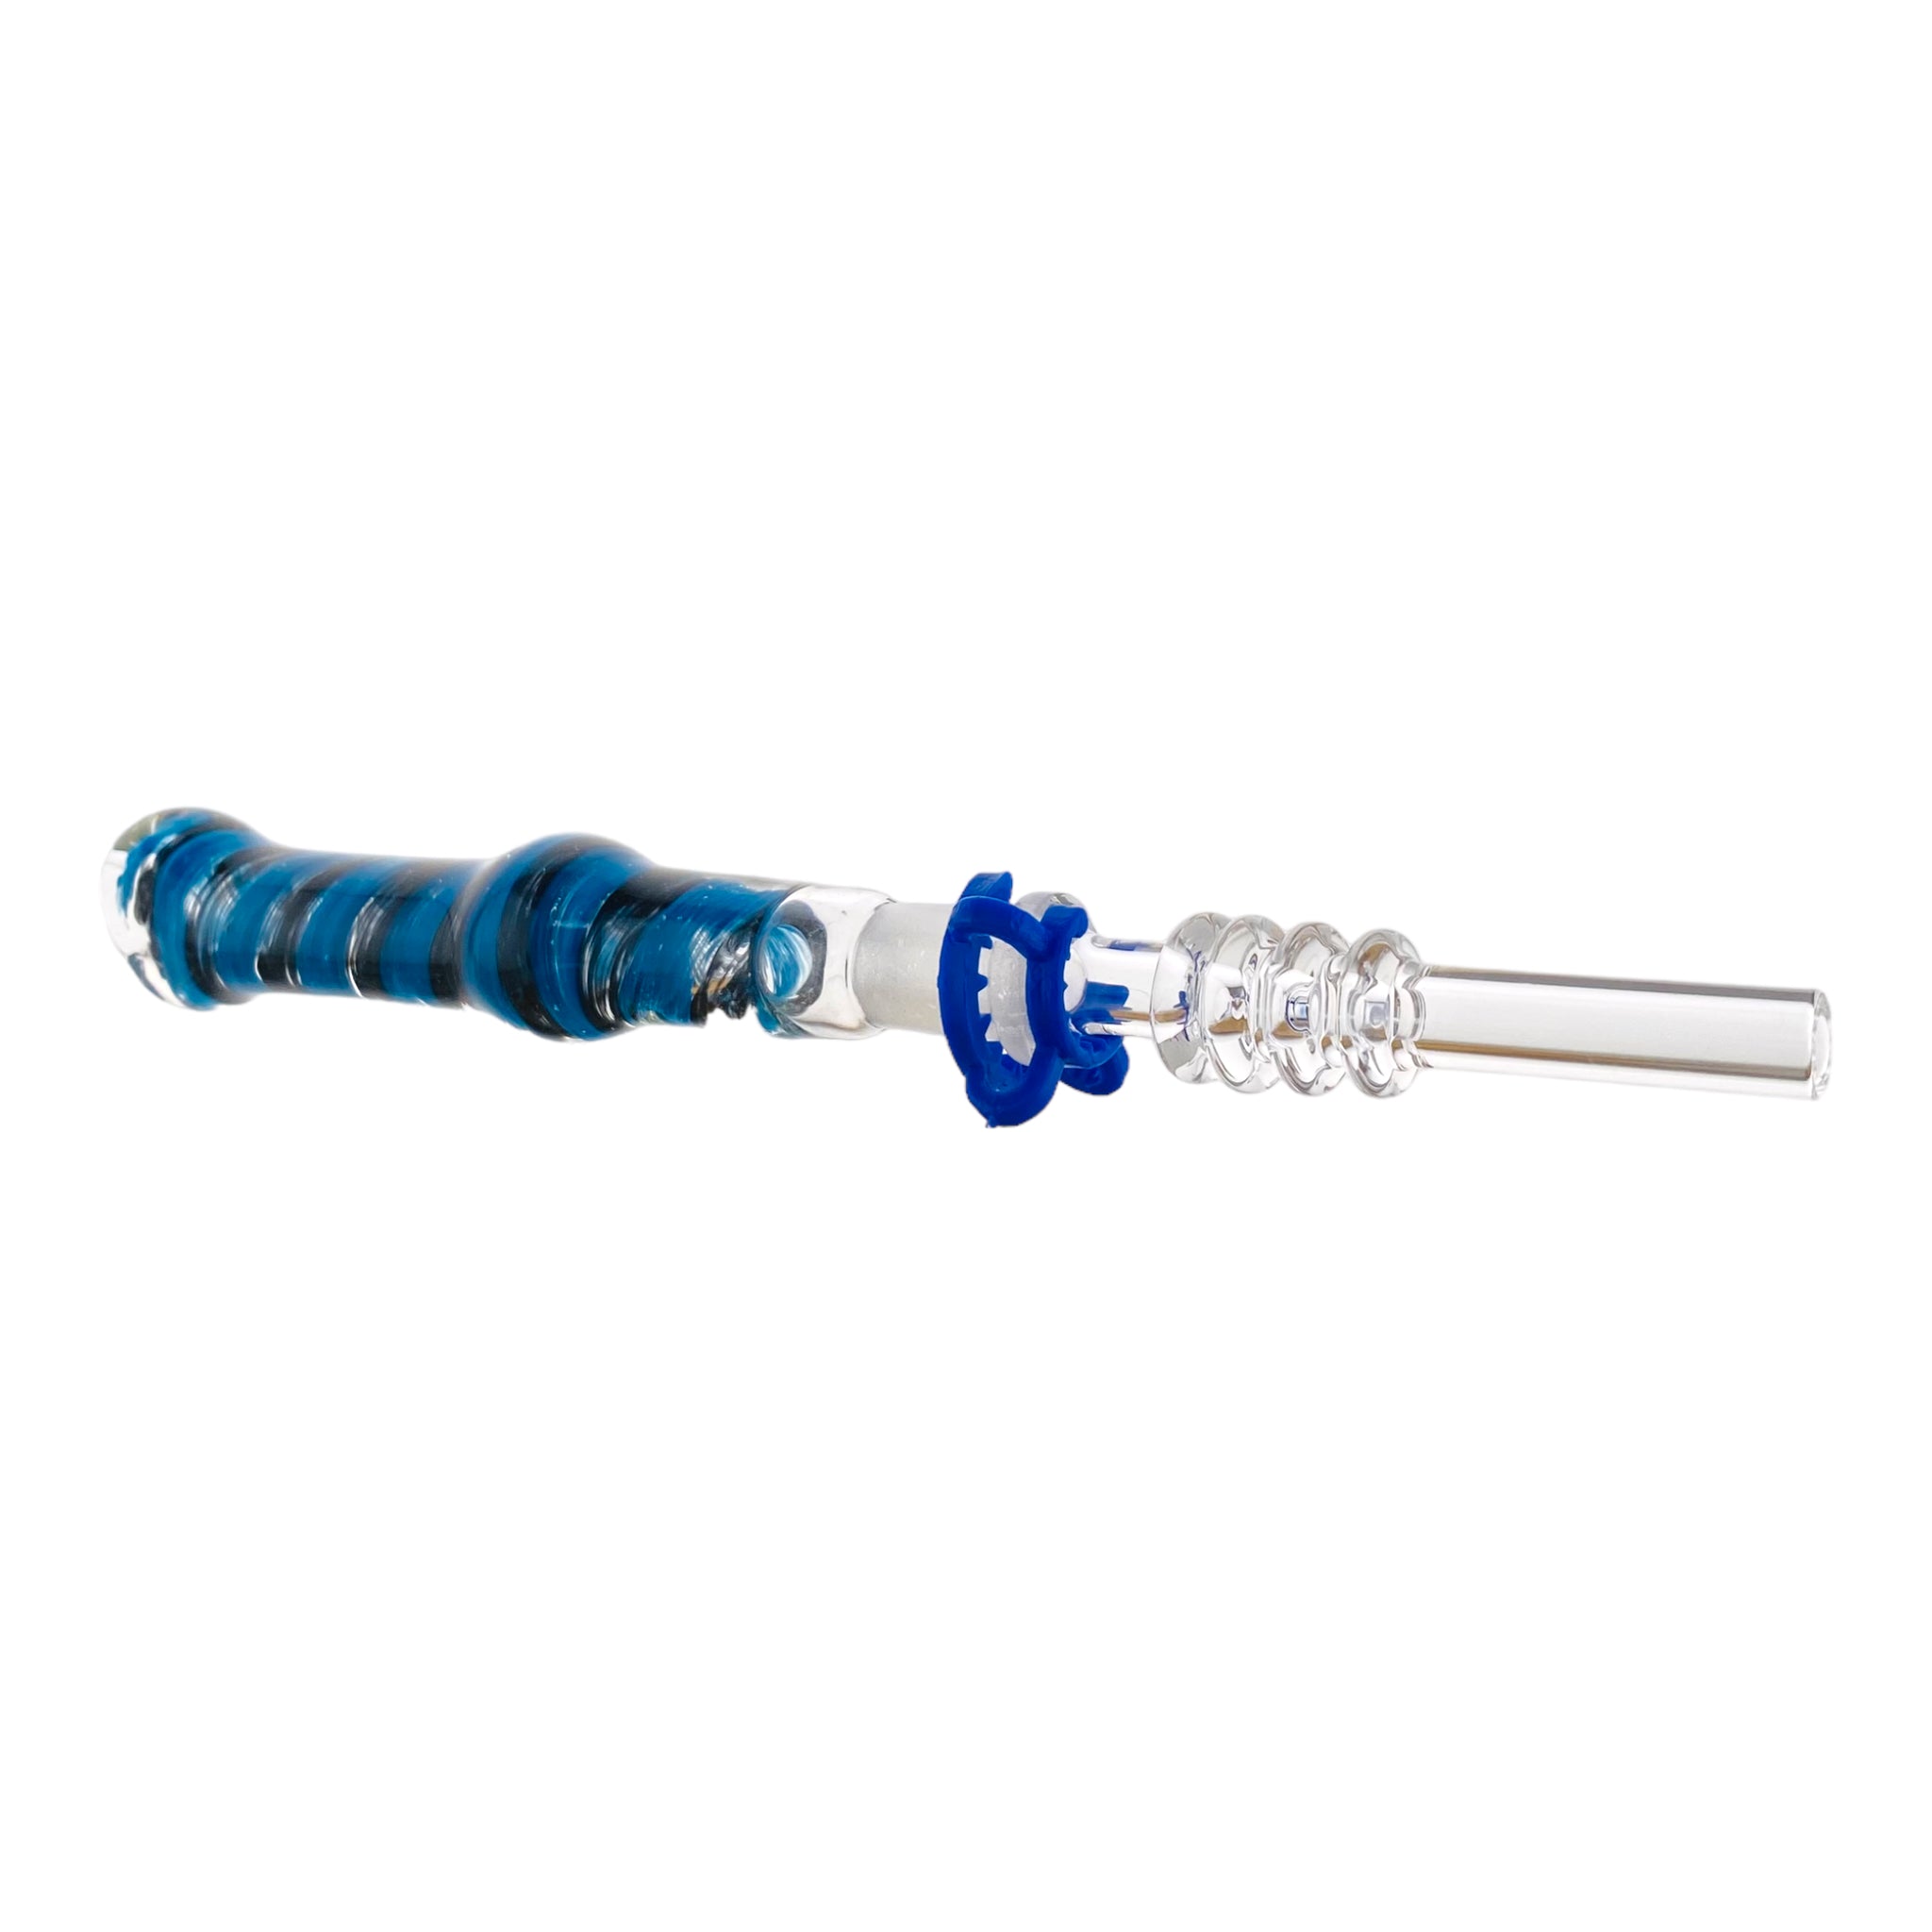 10mm Nectar Collector - Blue And Black Inside Out With 10mm Quartz Tip